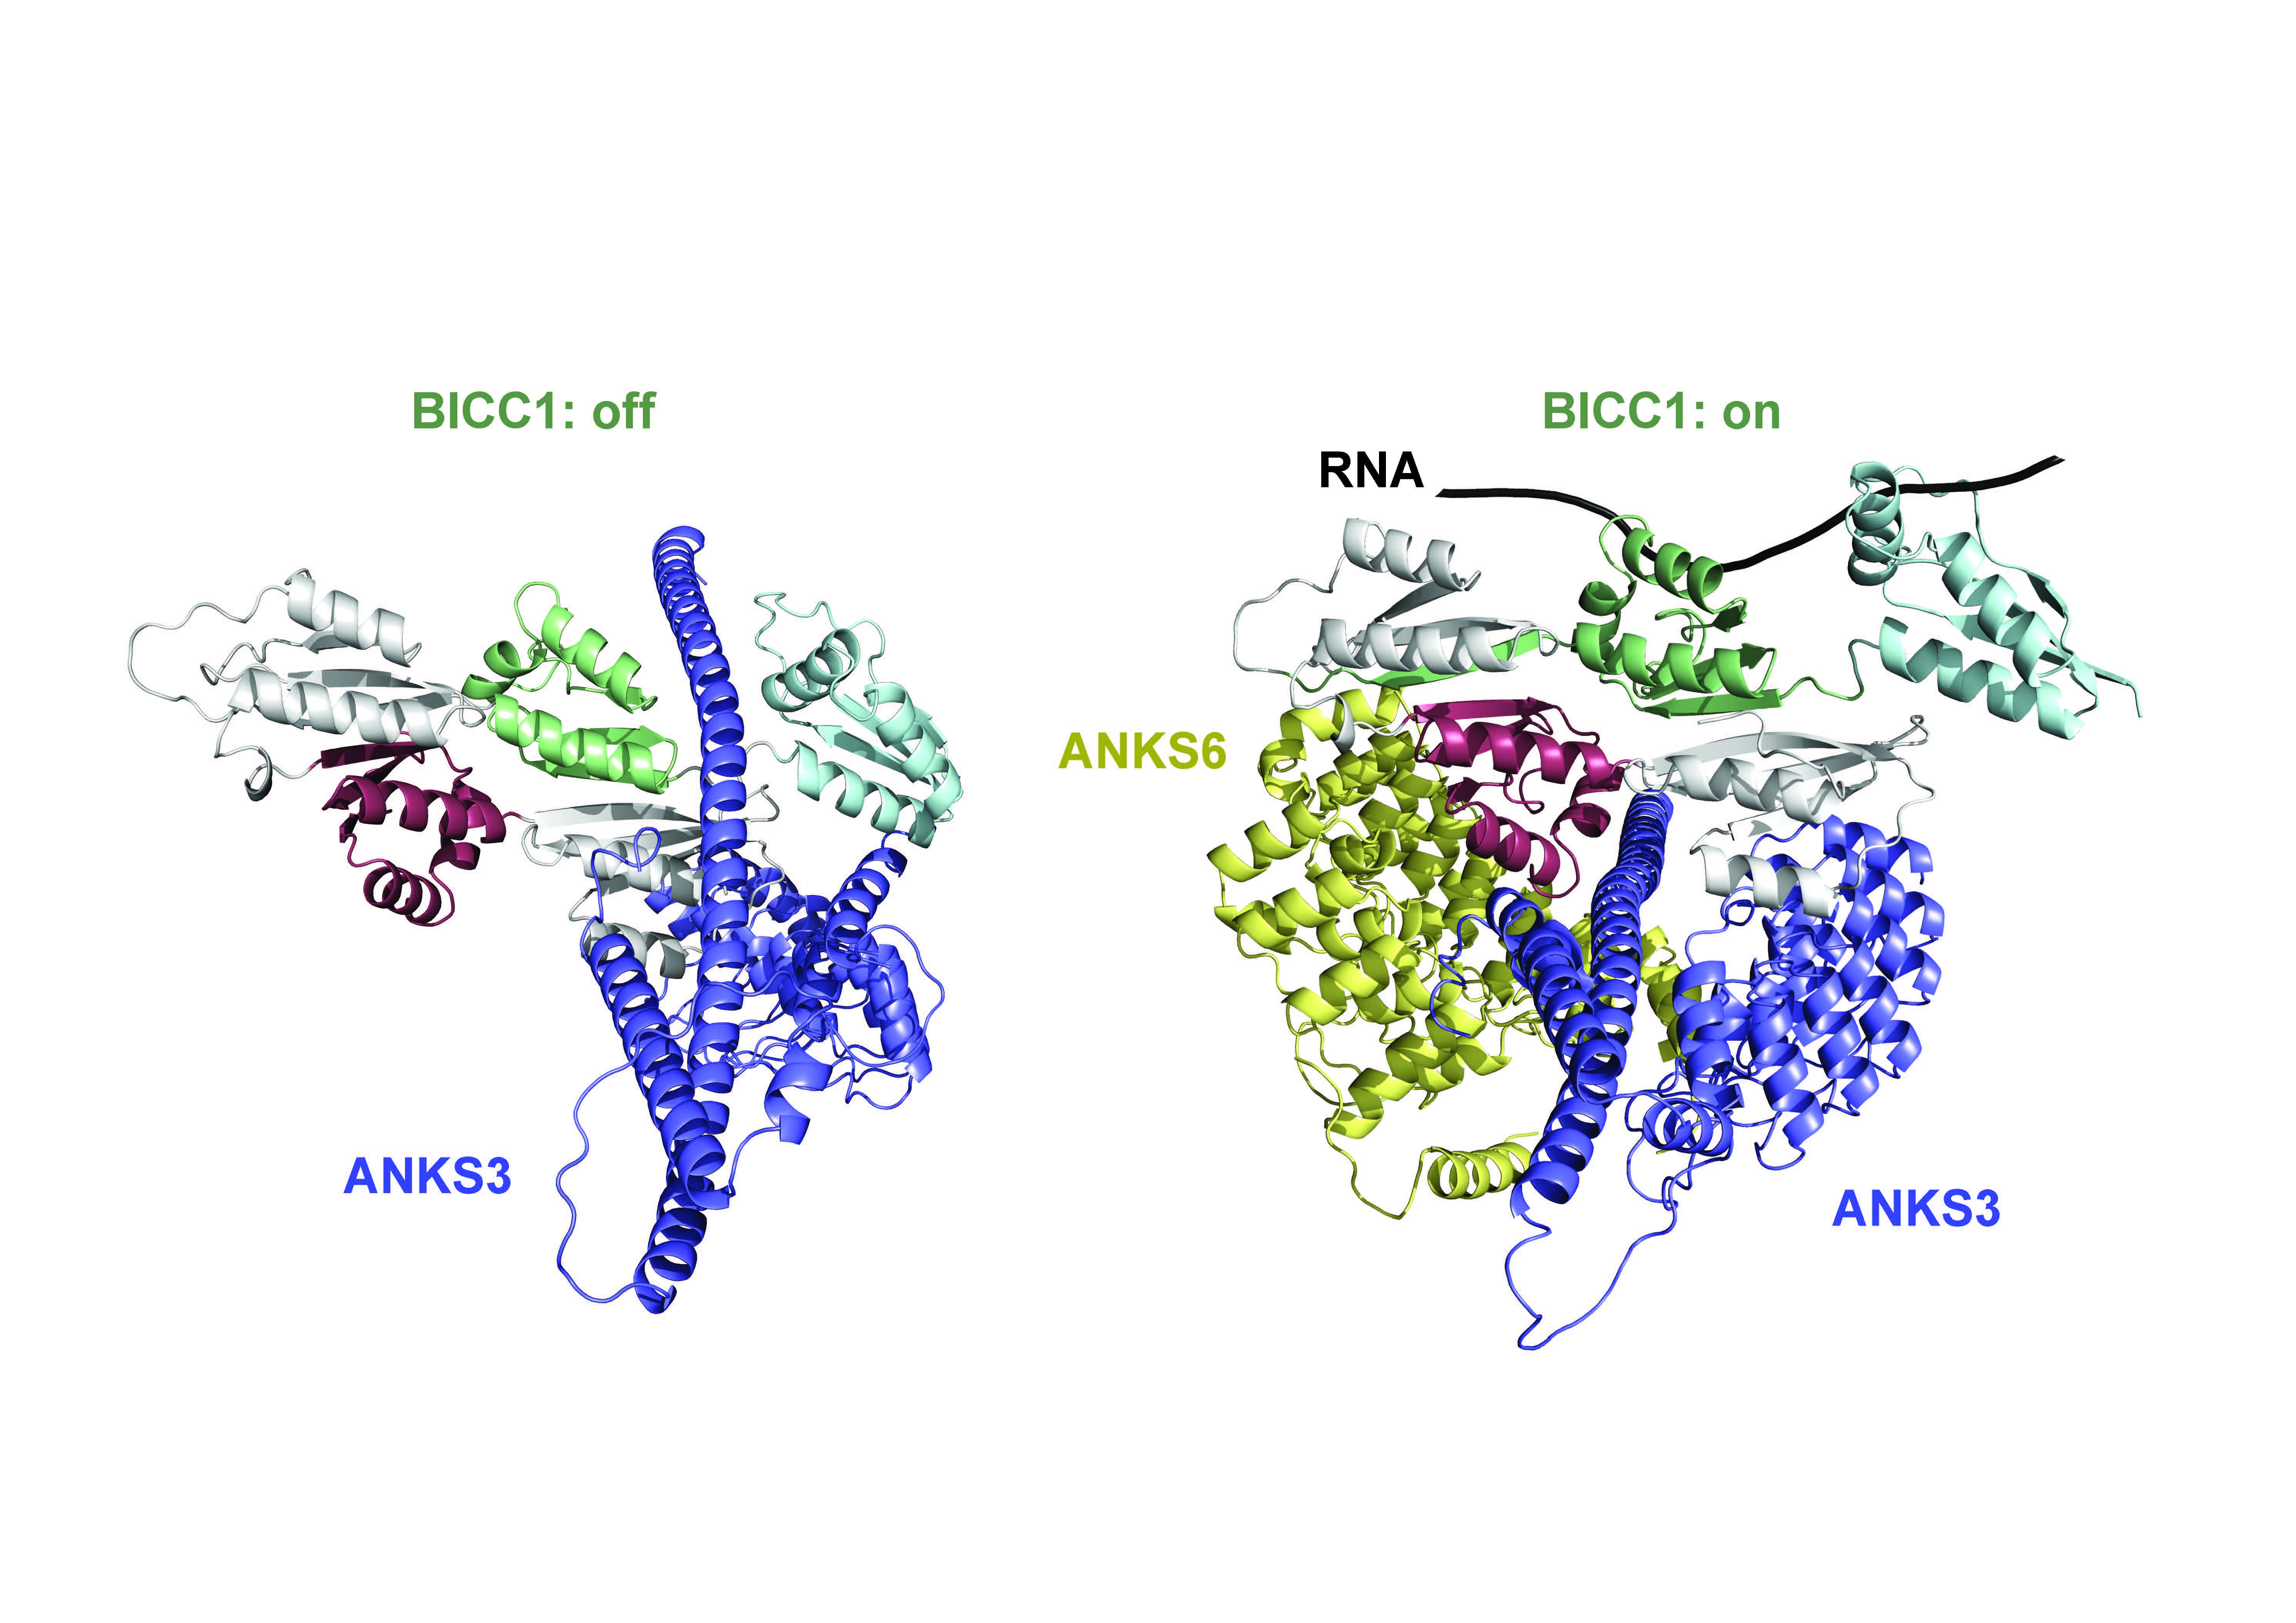 The three proteins, BICC1, ANKS3, and ANKS6 interacting to bind and regulate mRNA in asymmetrical development of organs. Credit: Benjamin Rothé and Zhidian Zhang (EPFL) 